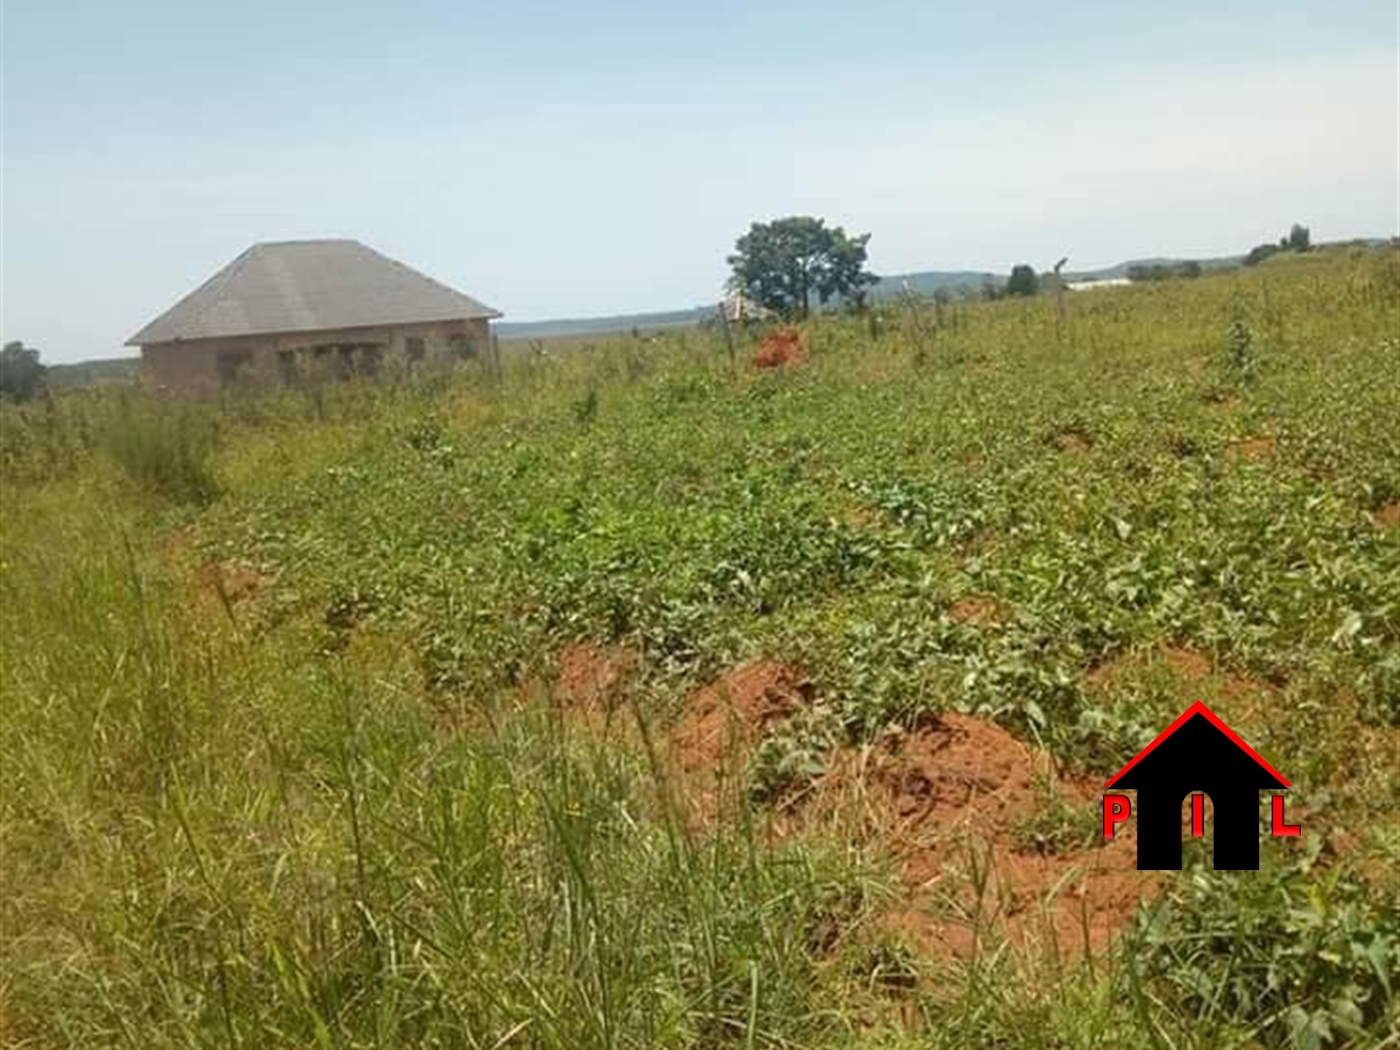 Agricultural Land for sale in Buwooya Mukono